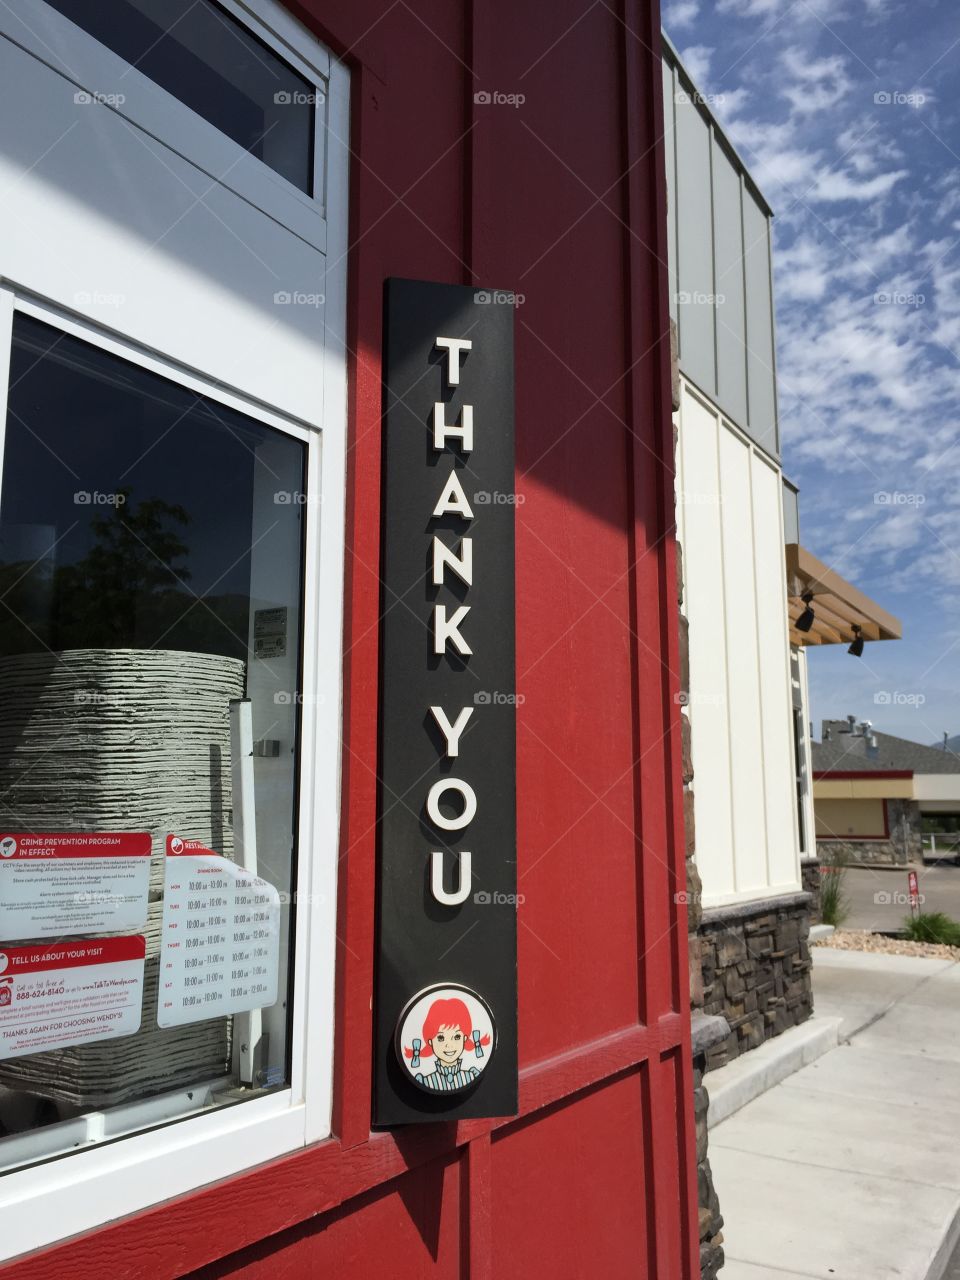 "Thank you" Wendy's sign. "Thank you" sign at Wendy's restaurant 